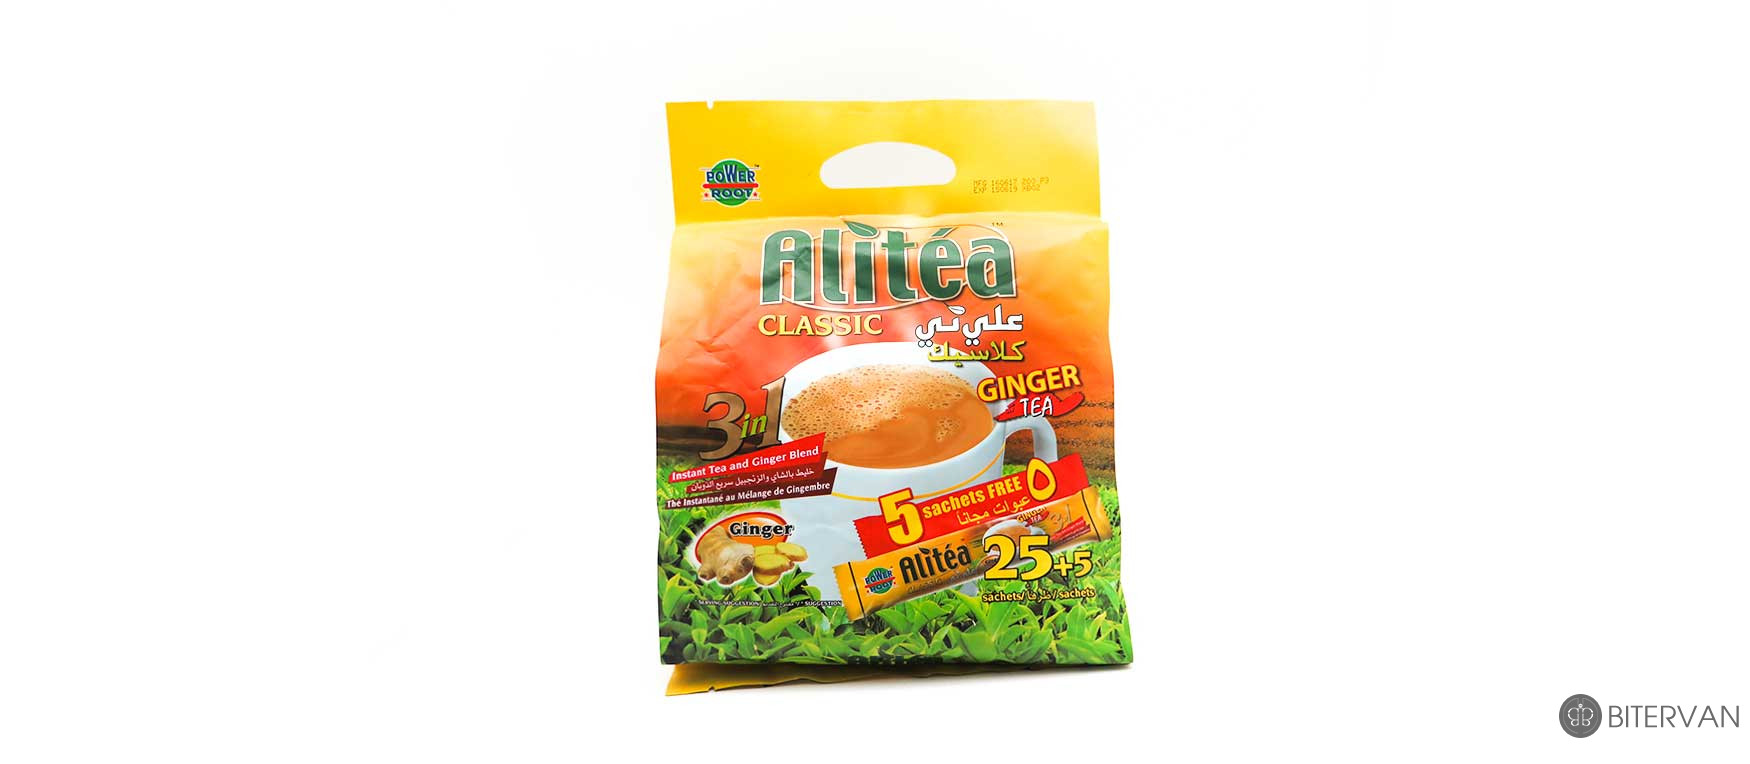 Alitea CLASSIC- Instant Tea and Ginger Blend- 3 in 1- 30 sachets